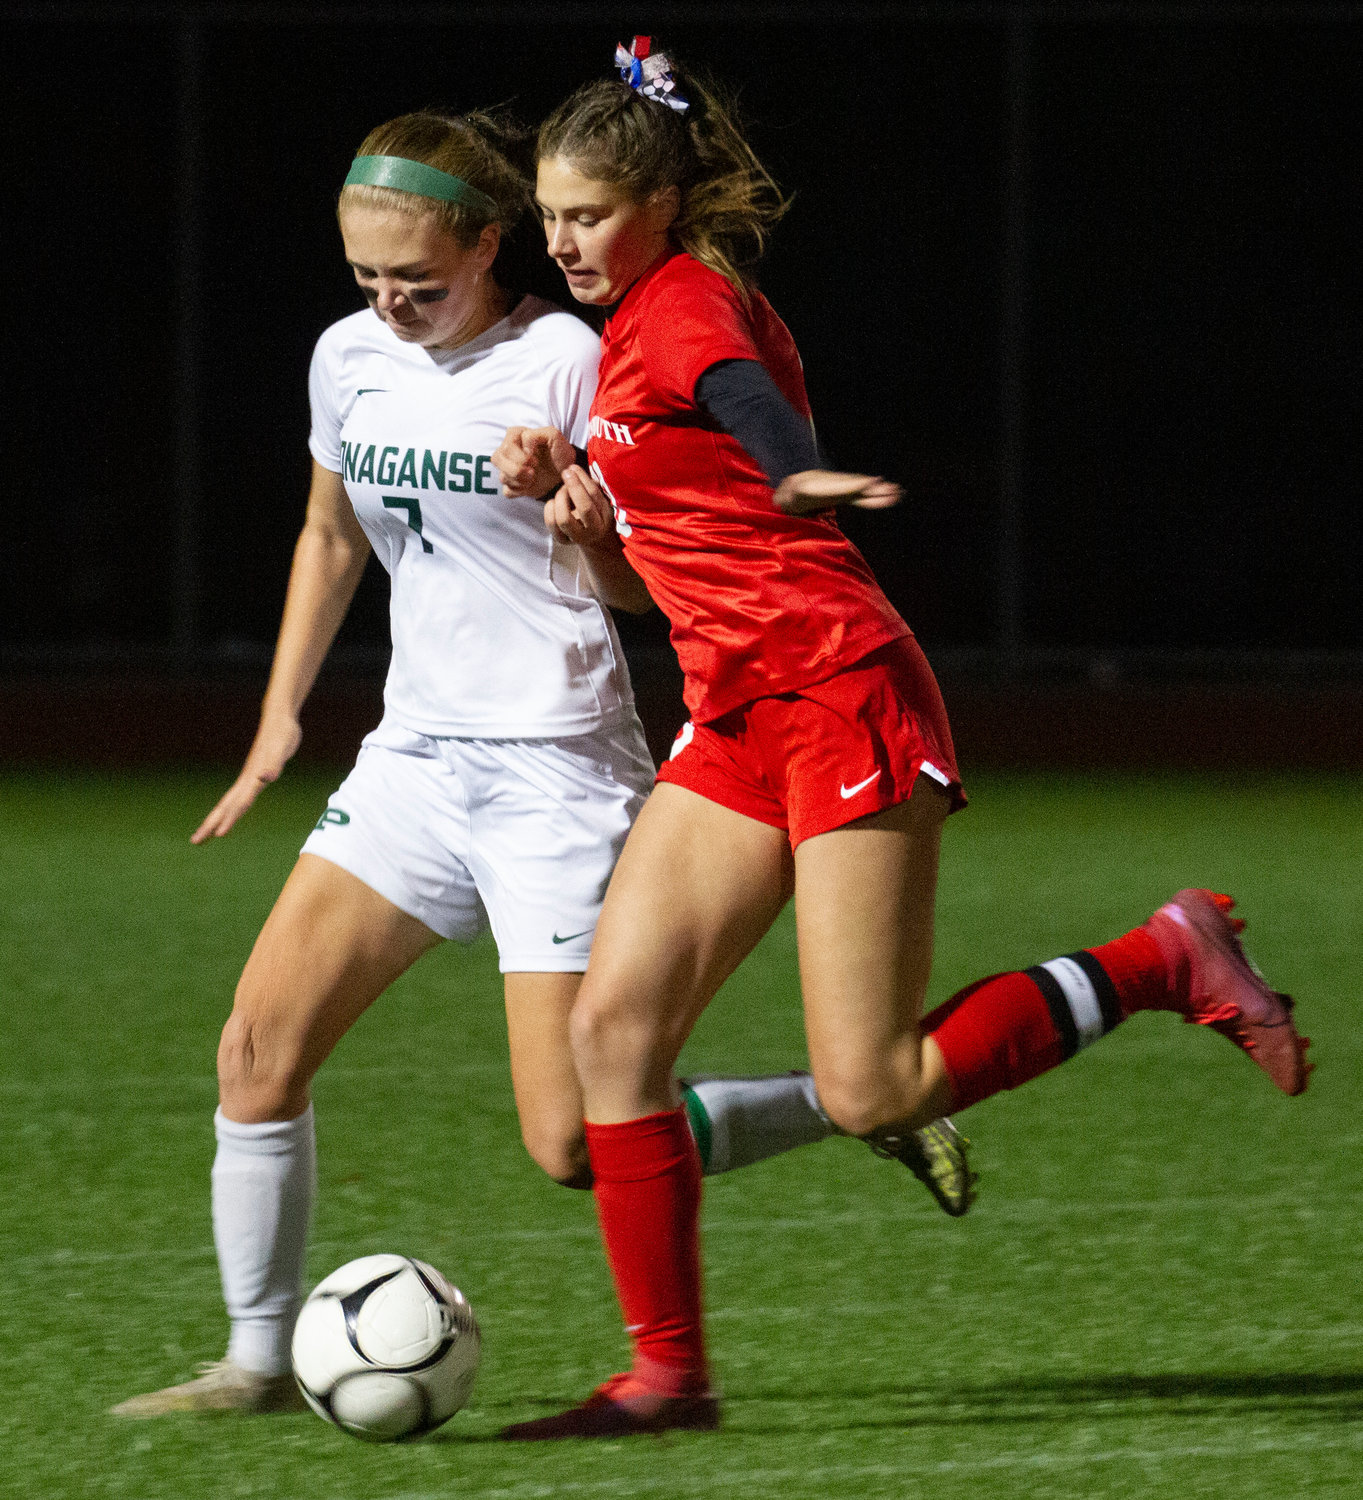 Portsmouth’s Kaitlin Roche dribbles by a defender and attempts to make a run at the goal against East Greenwich during Wednesday night’s semifinal matchup. The Patriots won, 5-0, and advanced to play in the Division II championship game at 2:30 p.m. on Saturday, Nov. 12, at Cranston Stadium.